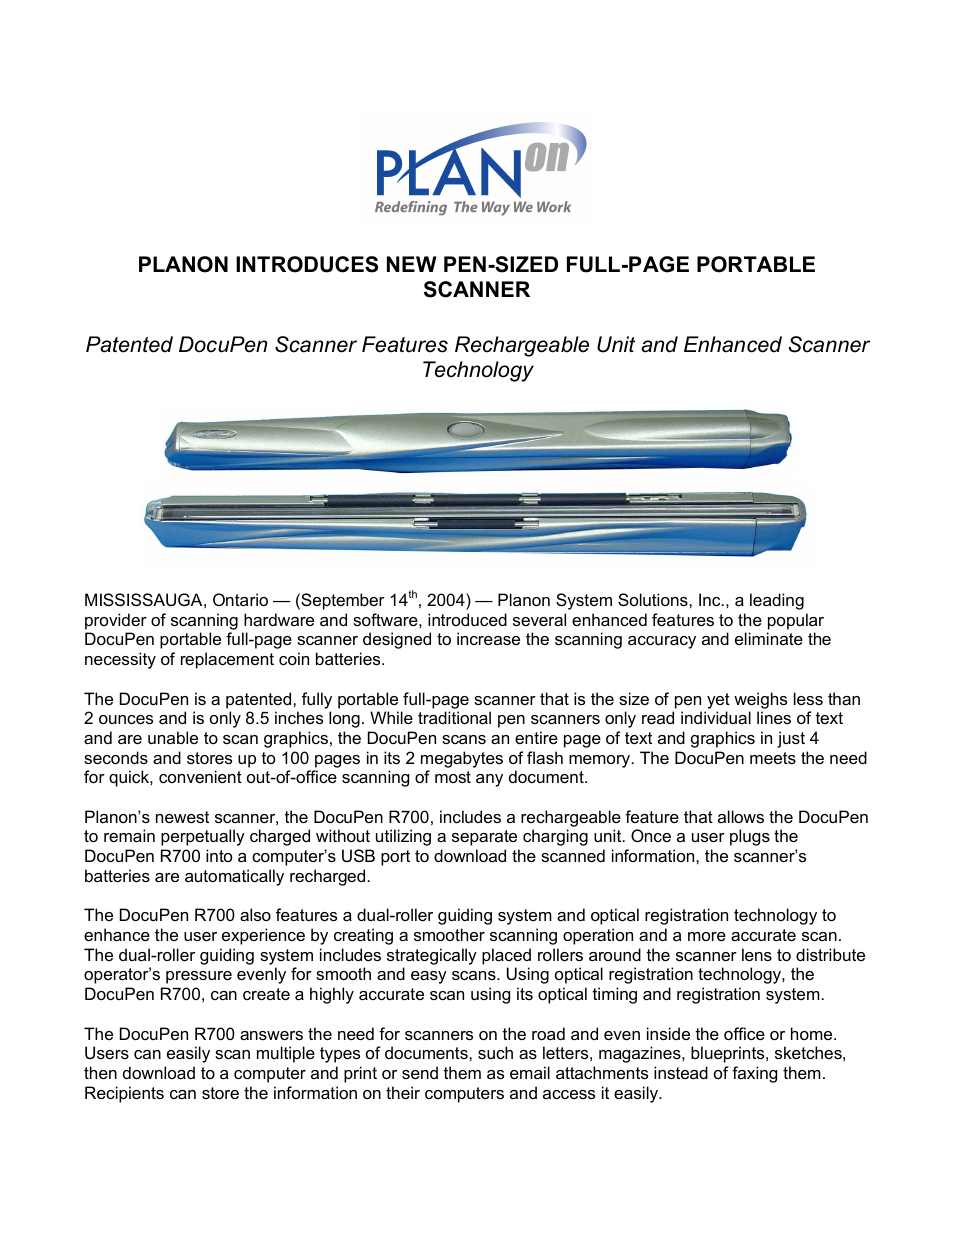 Pen-Sized Full-Page Portable Scanner